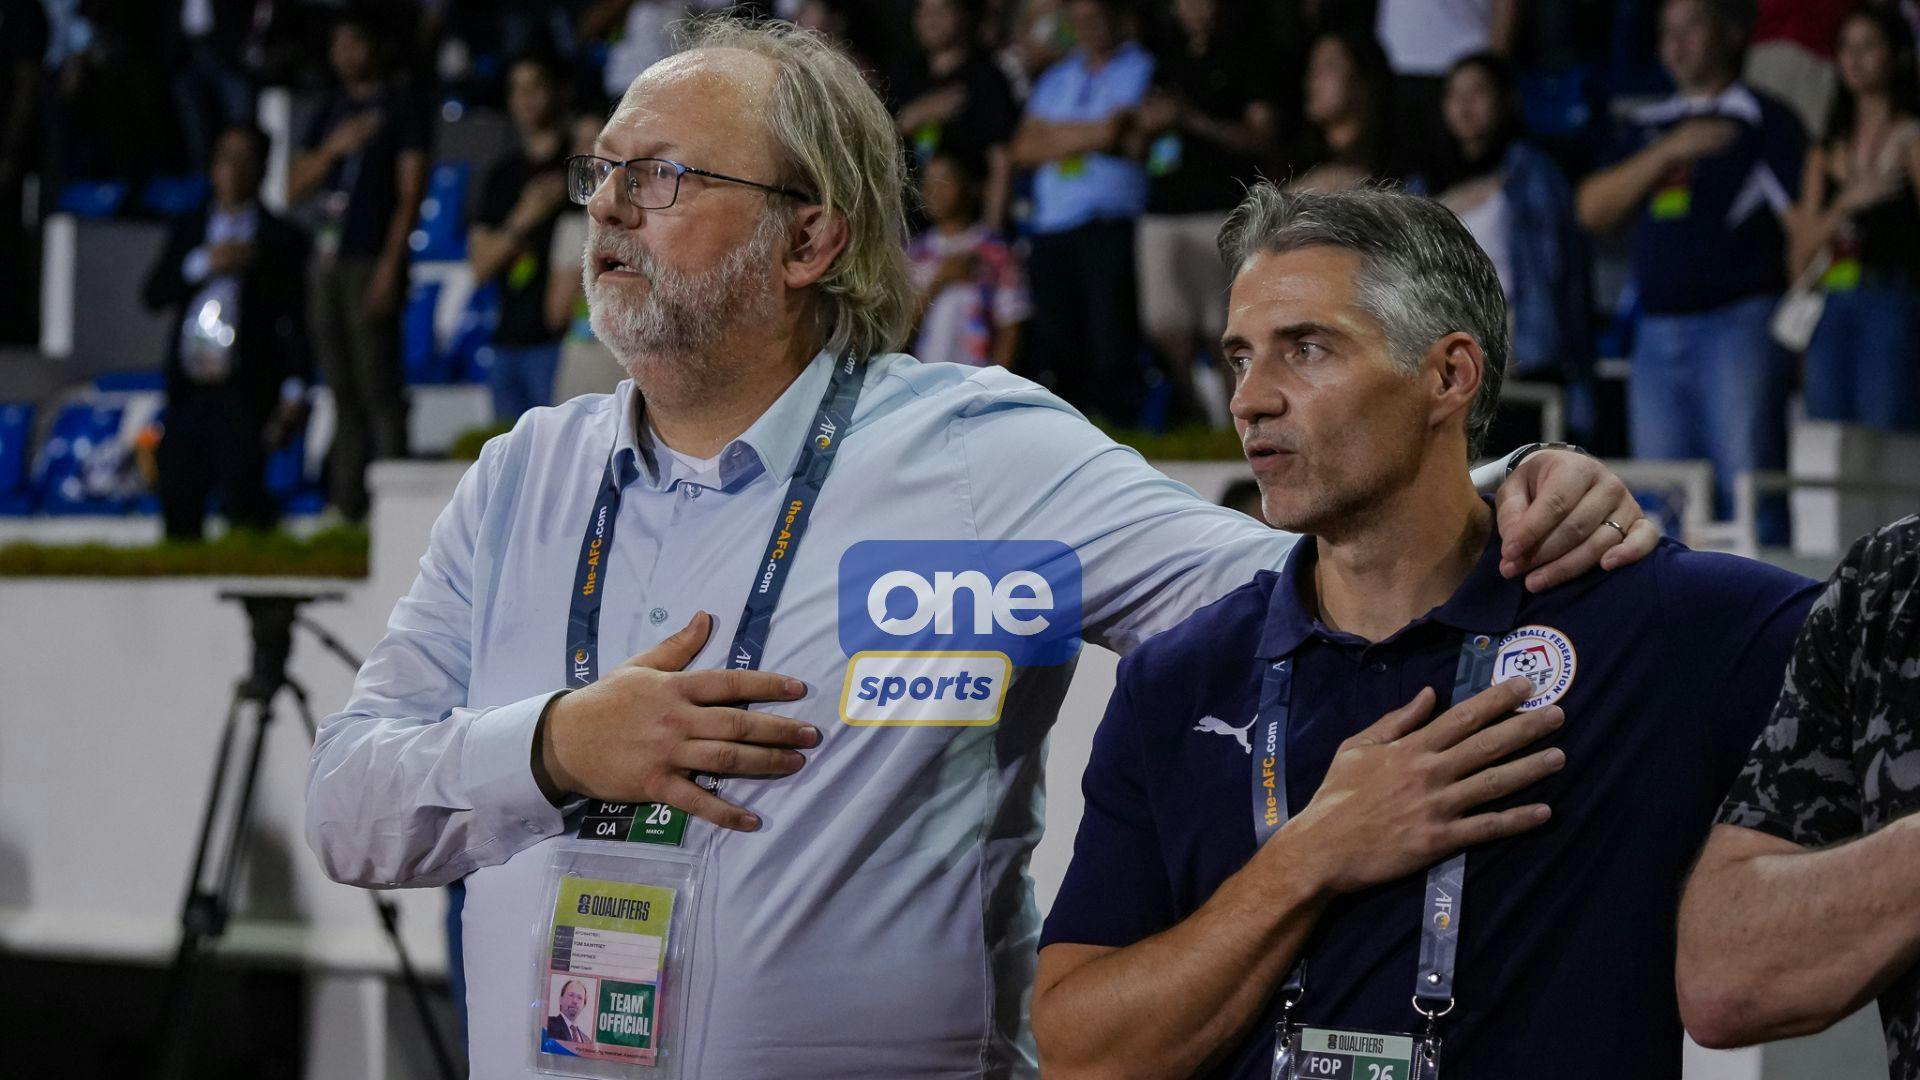 PH men’s football coach Tom Saintfiet apologizes for lopsided loss to Iraq, but bares hope of advancing in World Cup qualifiers